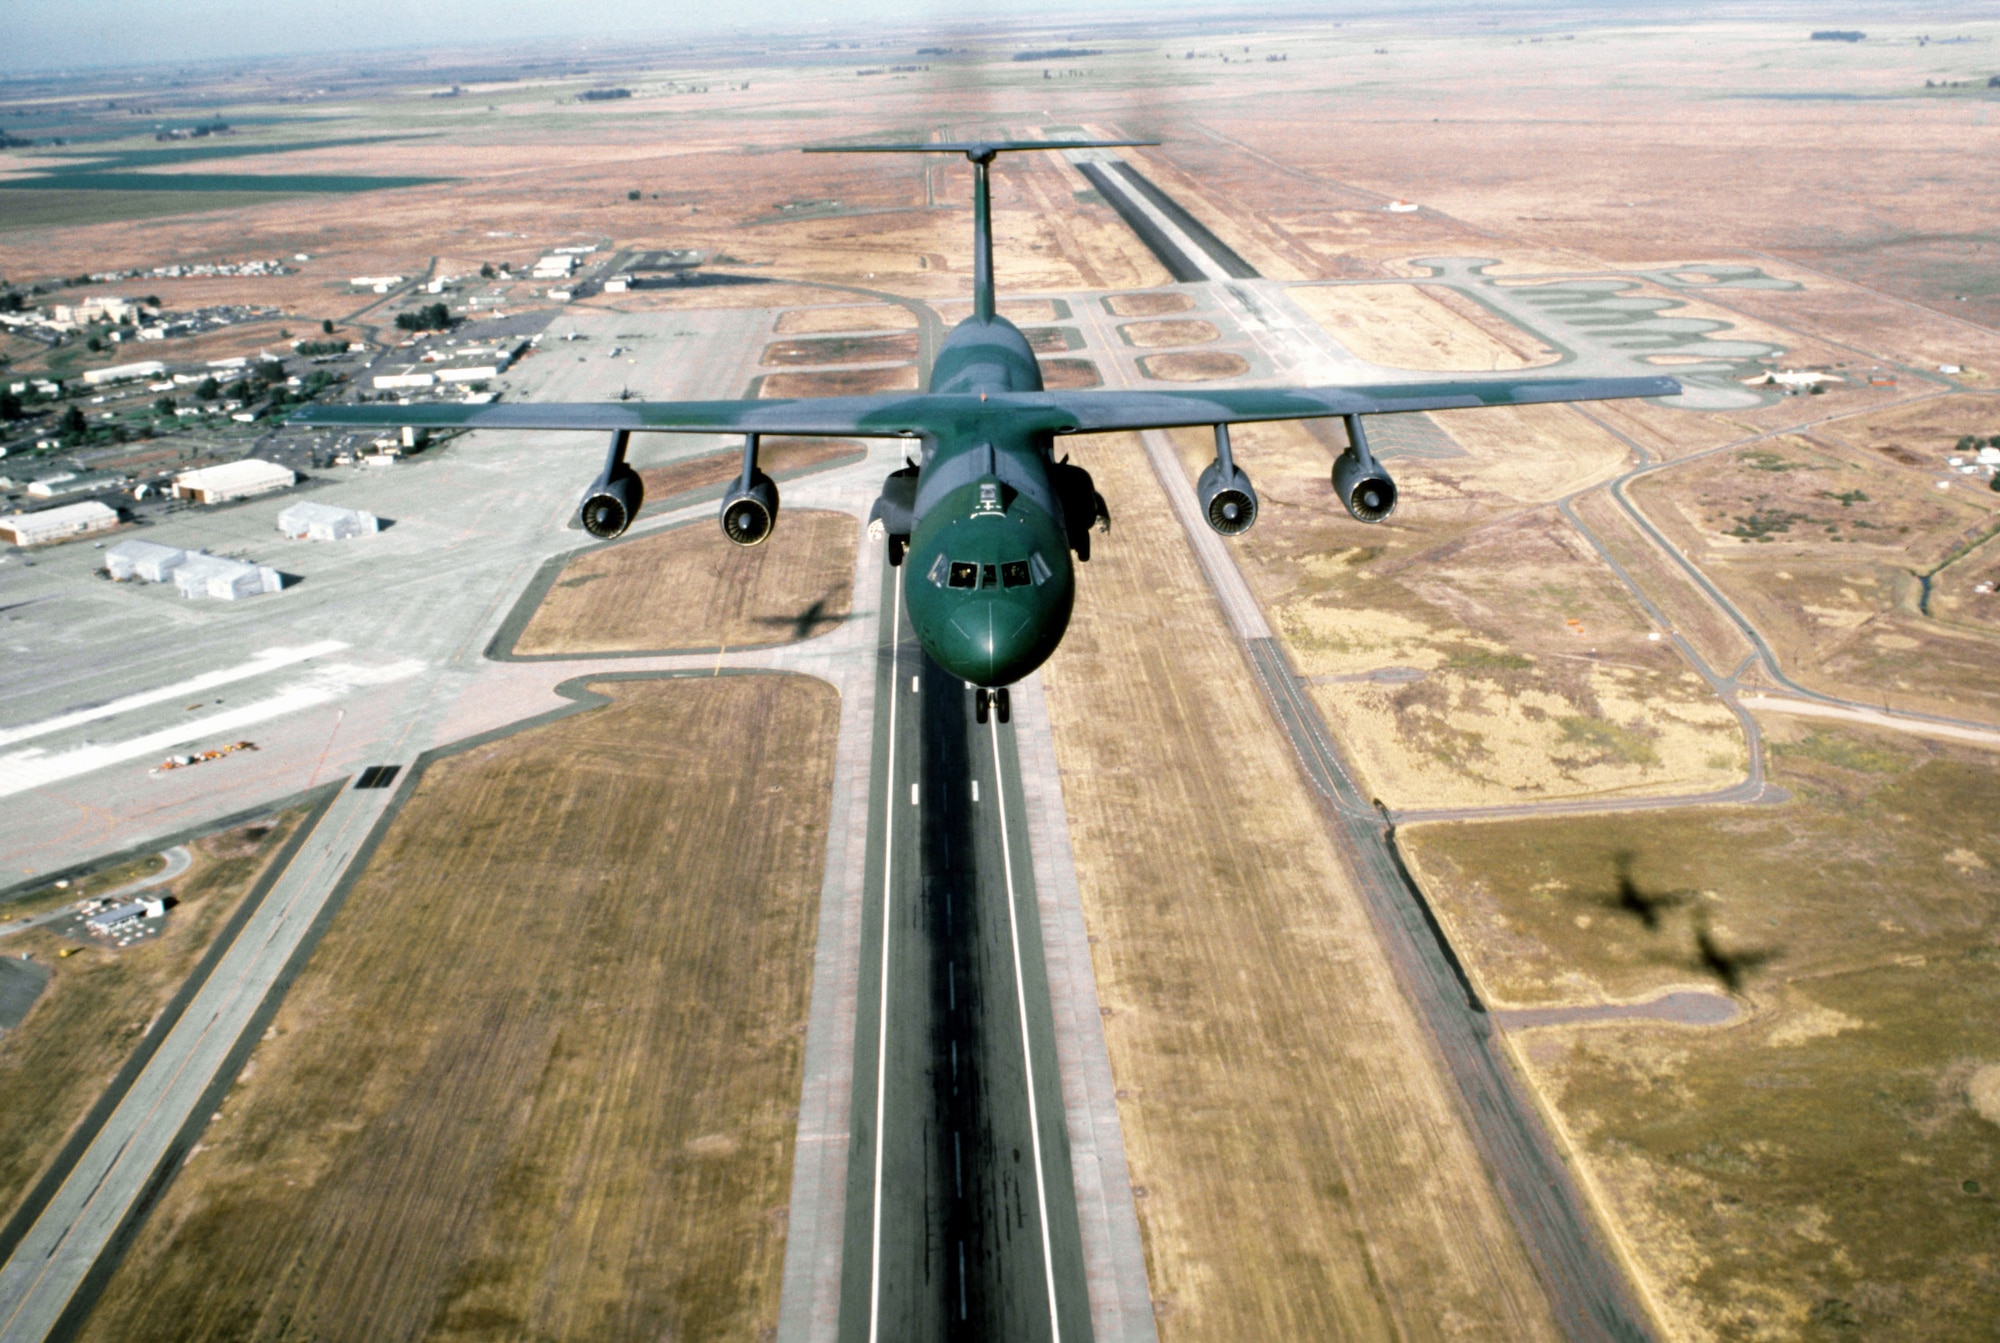 A large camouflaged military aircraft in the sky over a runway.